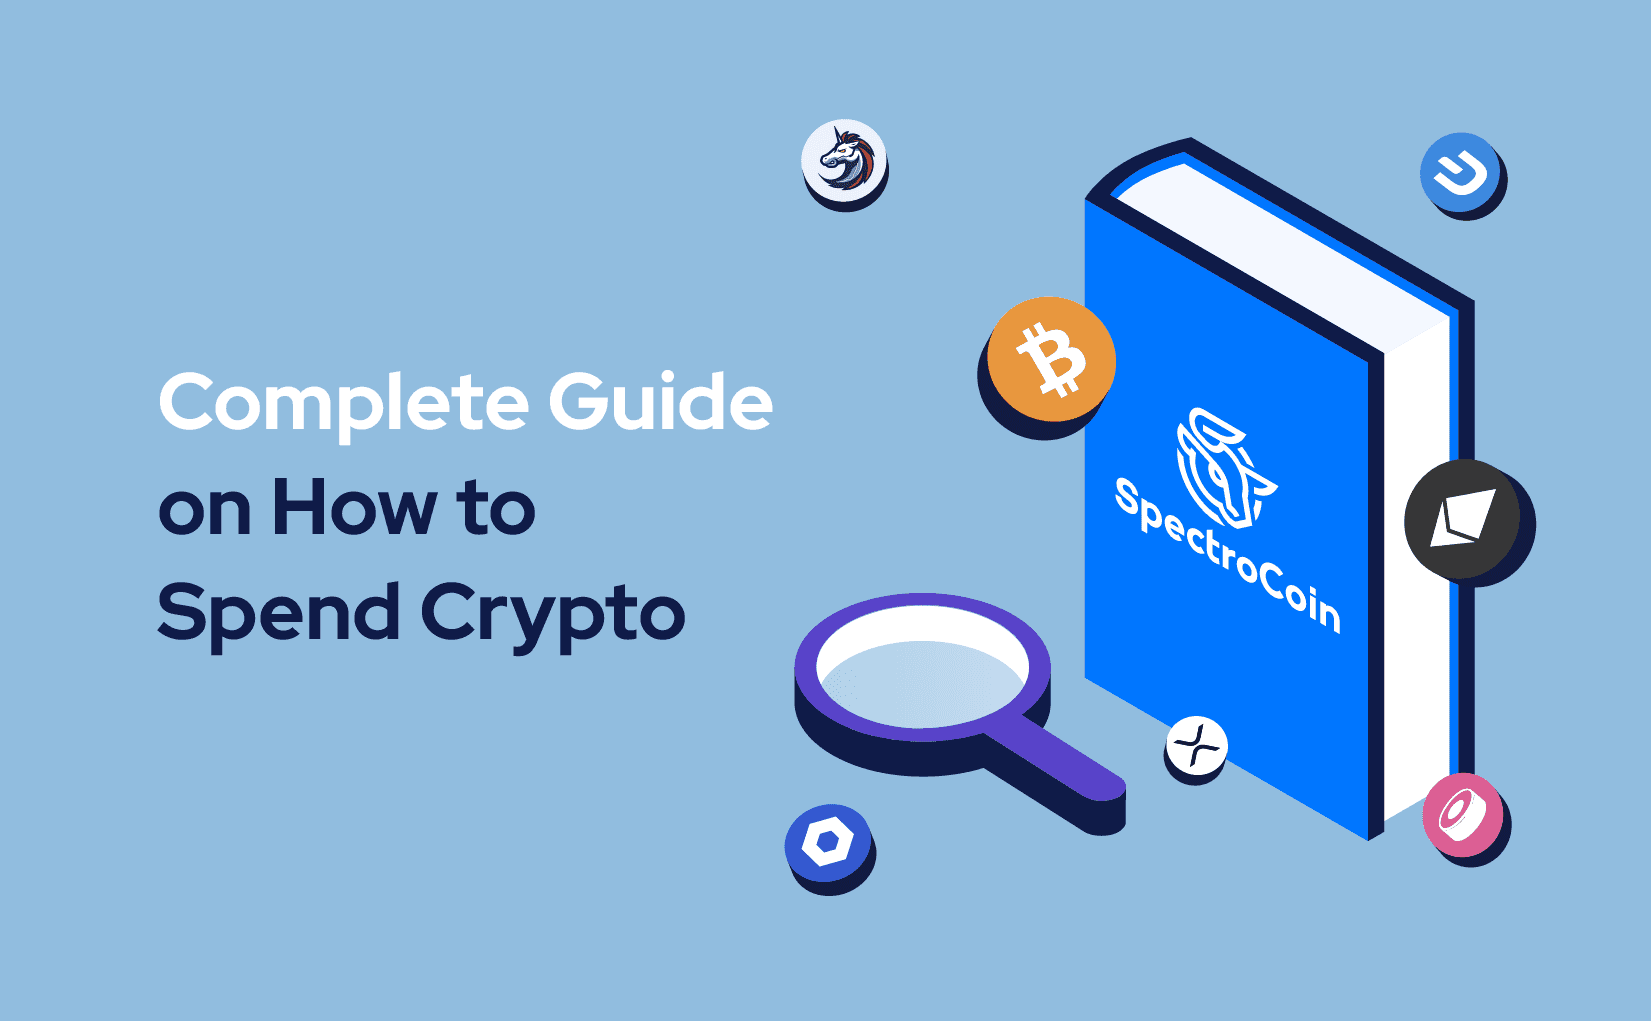 Complete Guide on How to Spend Crypto